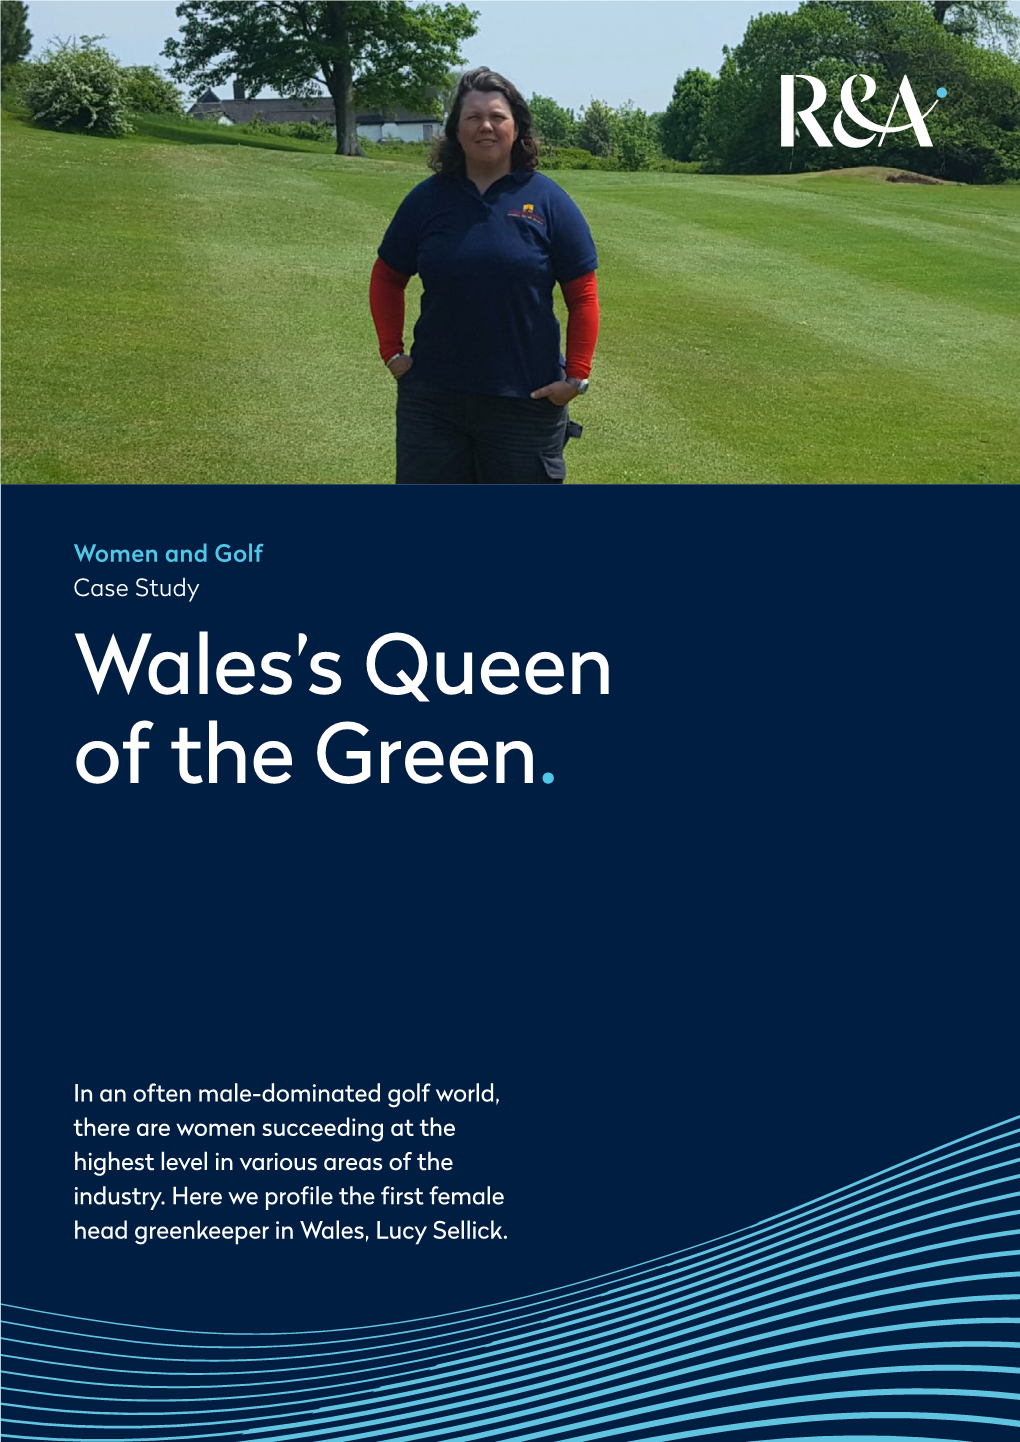 Wales's Queen of the Green